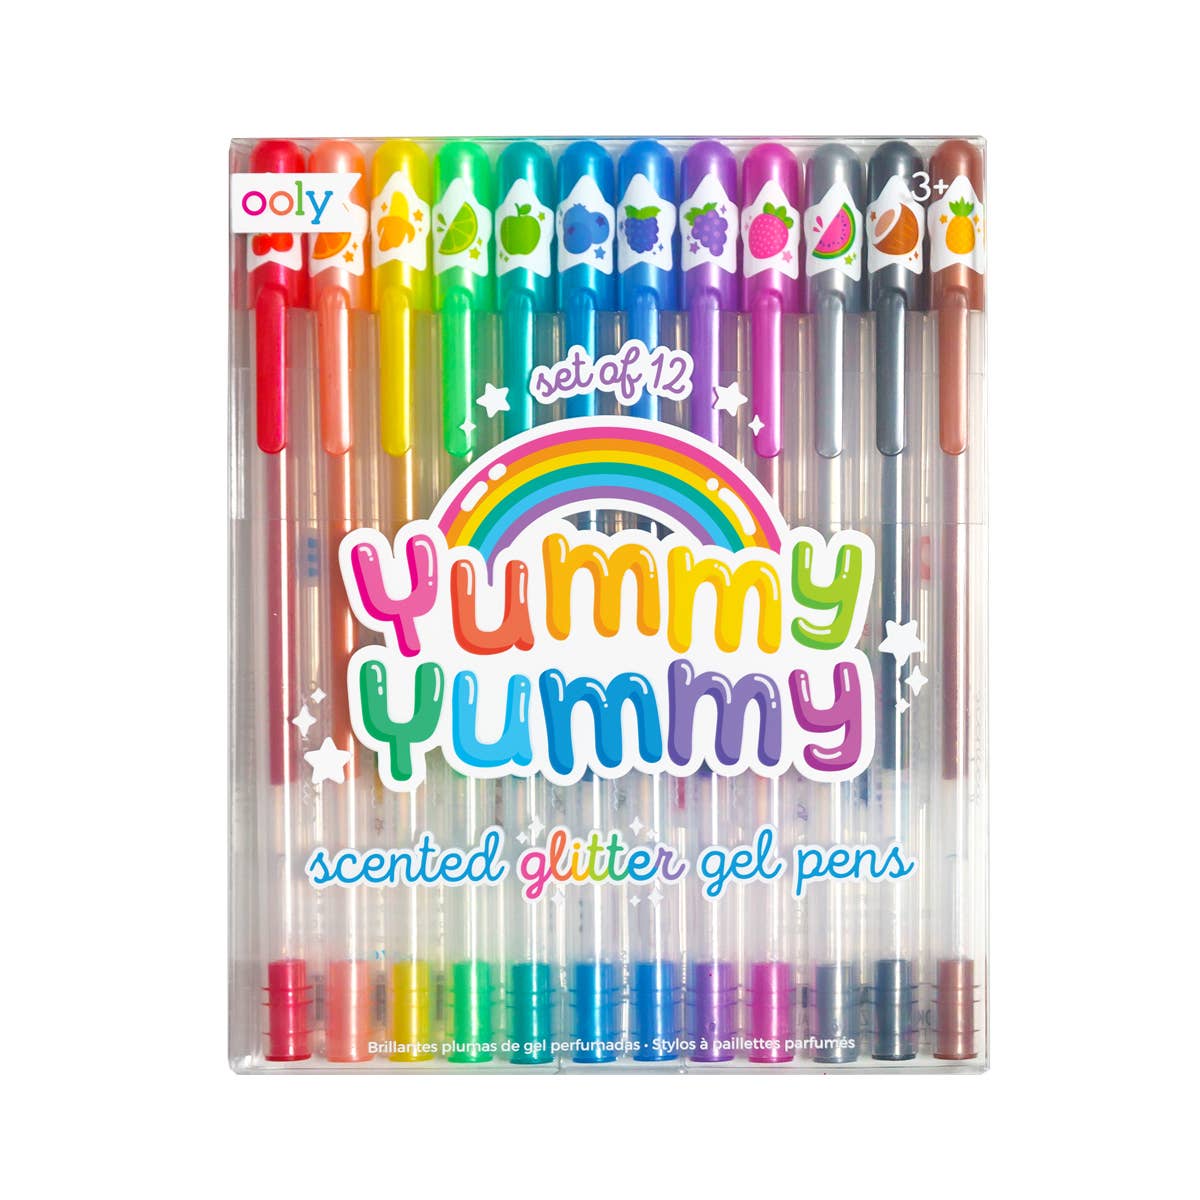 Ooly Yummy Yummy Scented Glitter Gel Pens; Set of 12